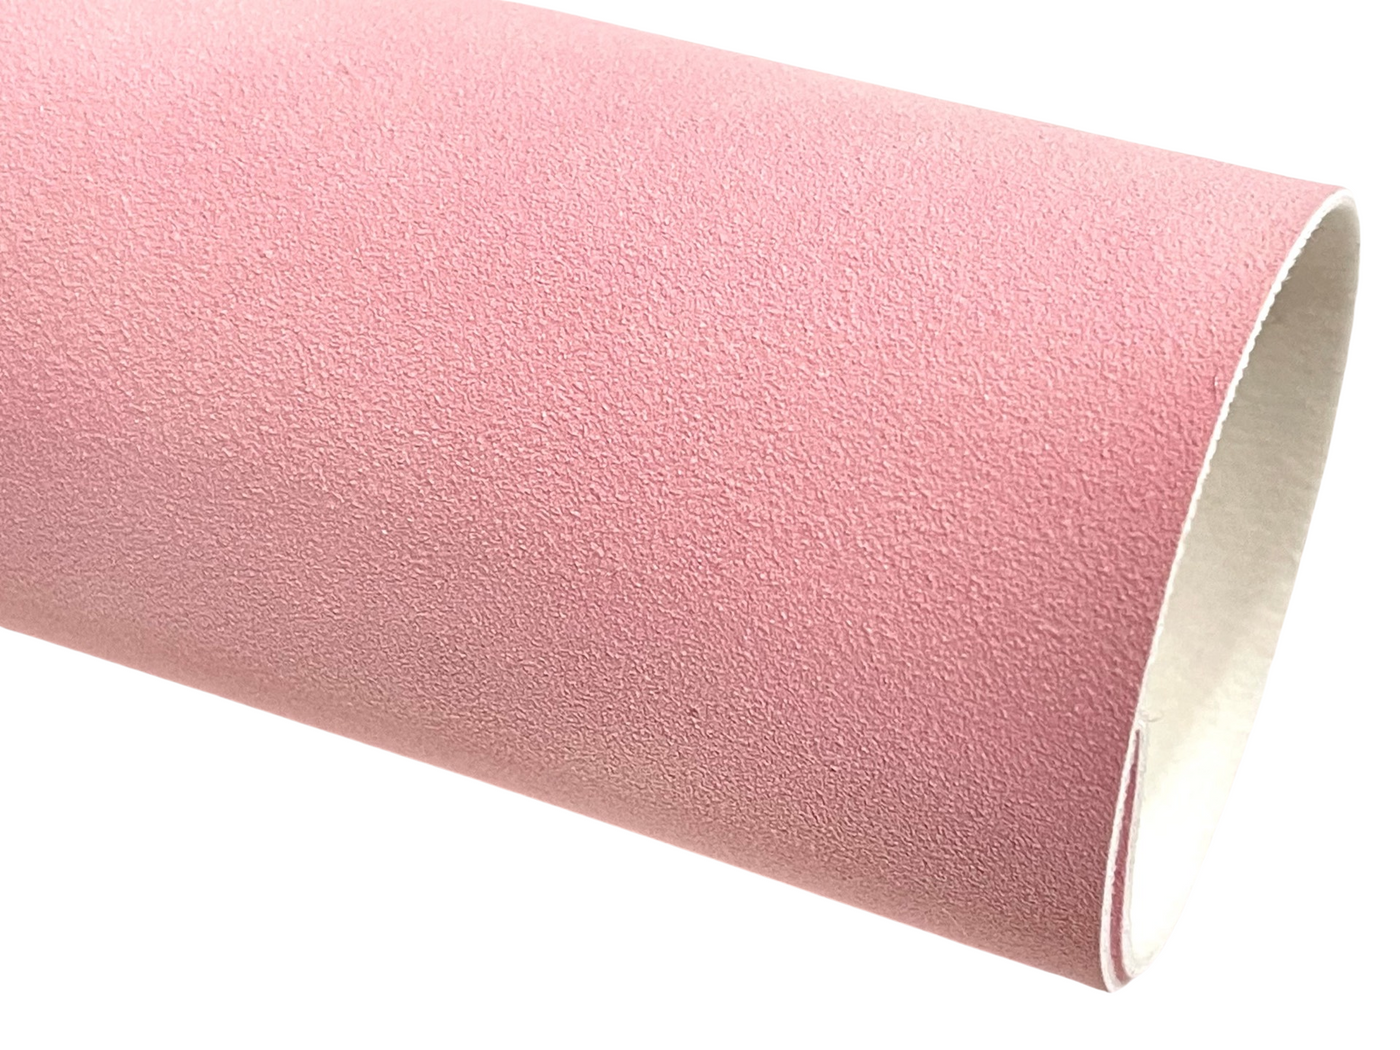 Pale Pink Suede Leatherette Sheet